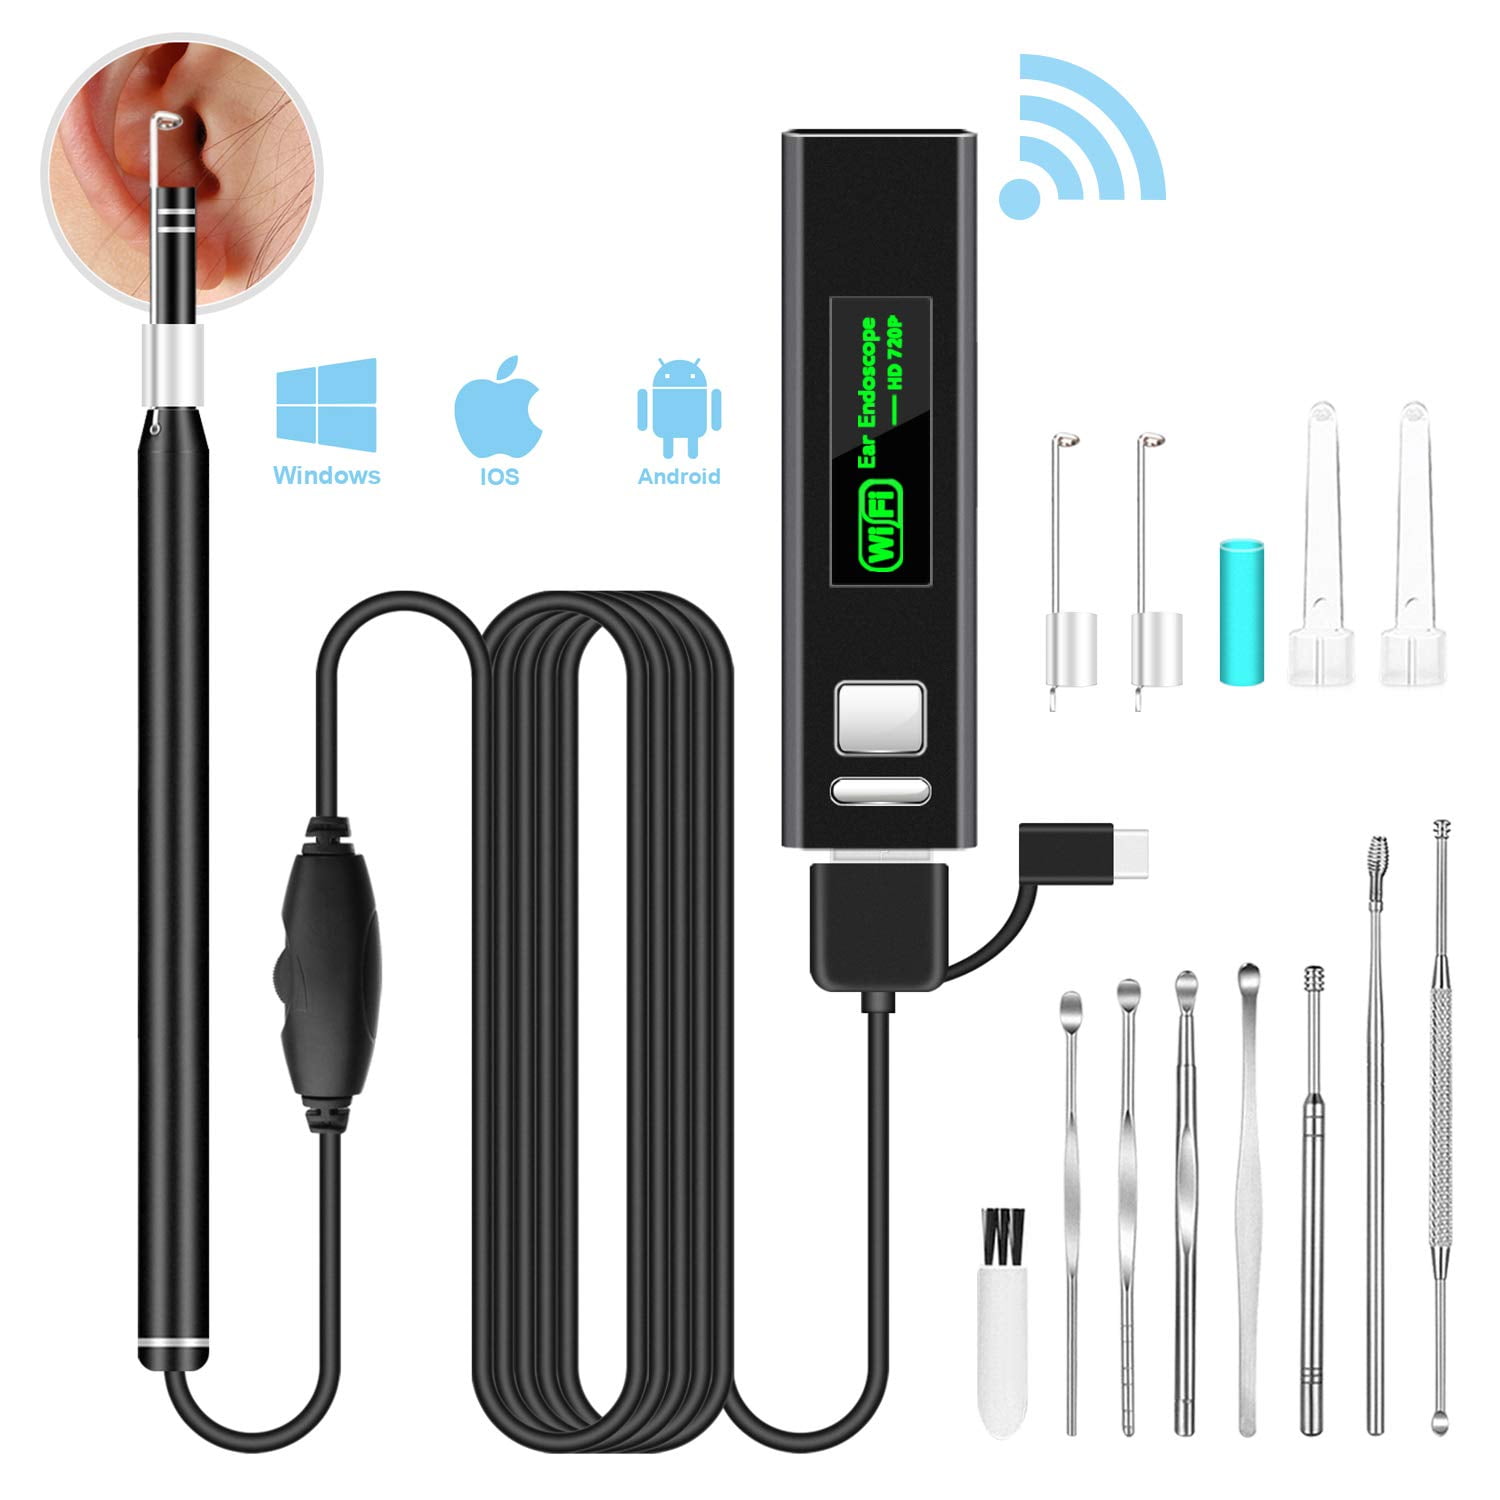 C 3 in 1 Super ear cleaning camera kit,easy to use USB otoscope endoscope by one,1080P waterproof HD visual endoscope,with earwax cleaning tool,for Android,Phone Tablet Mac,PC windows 